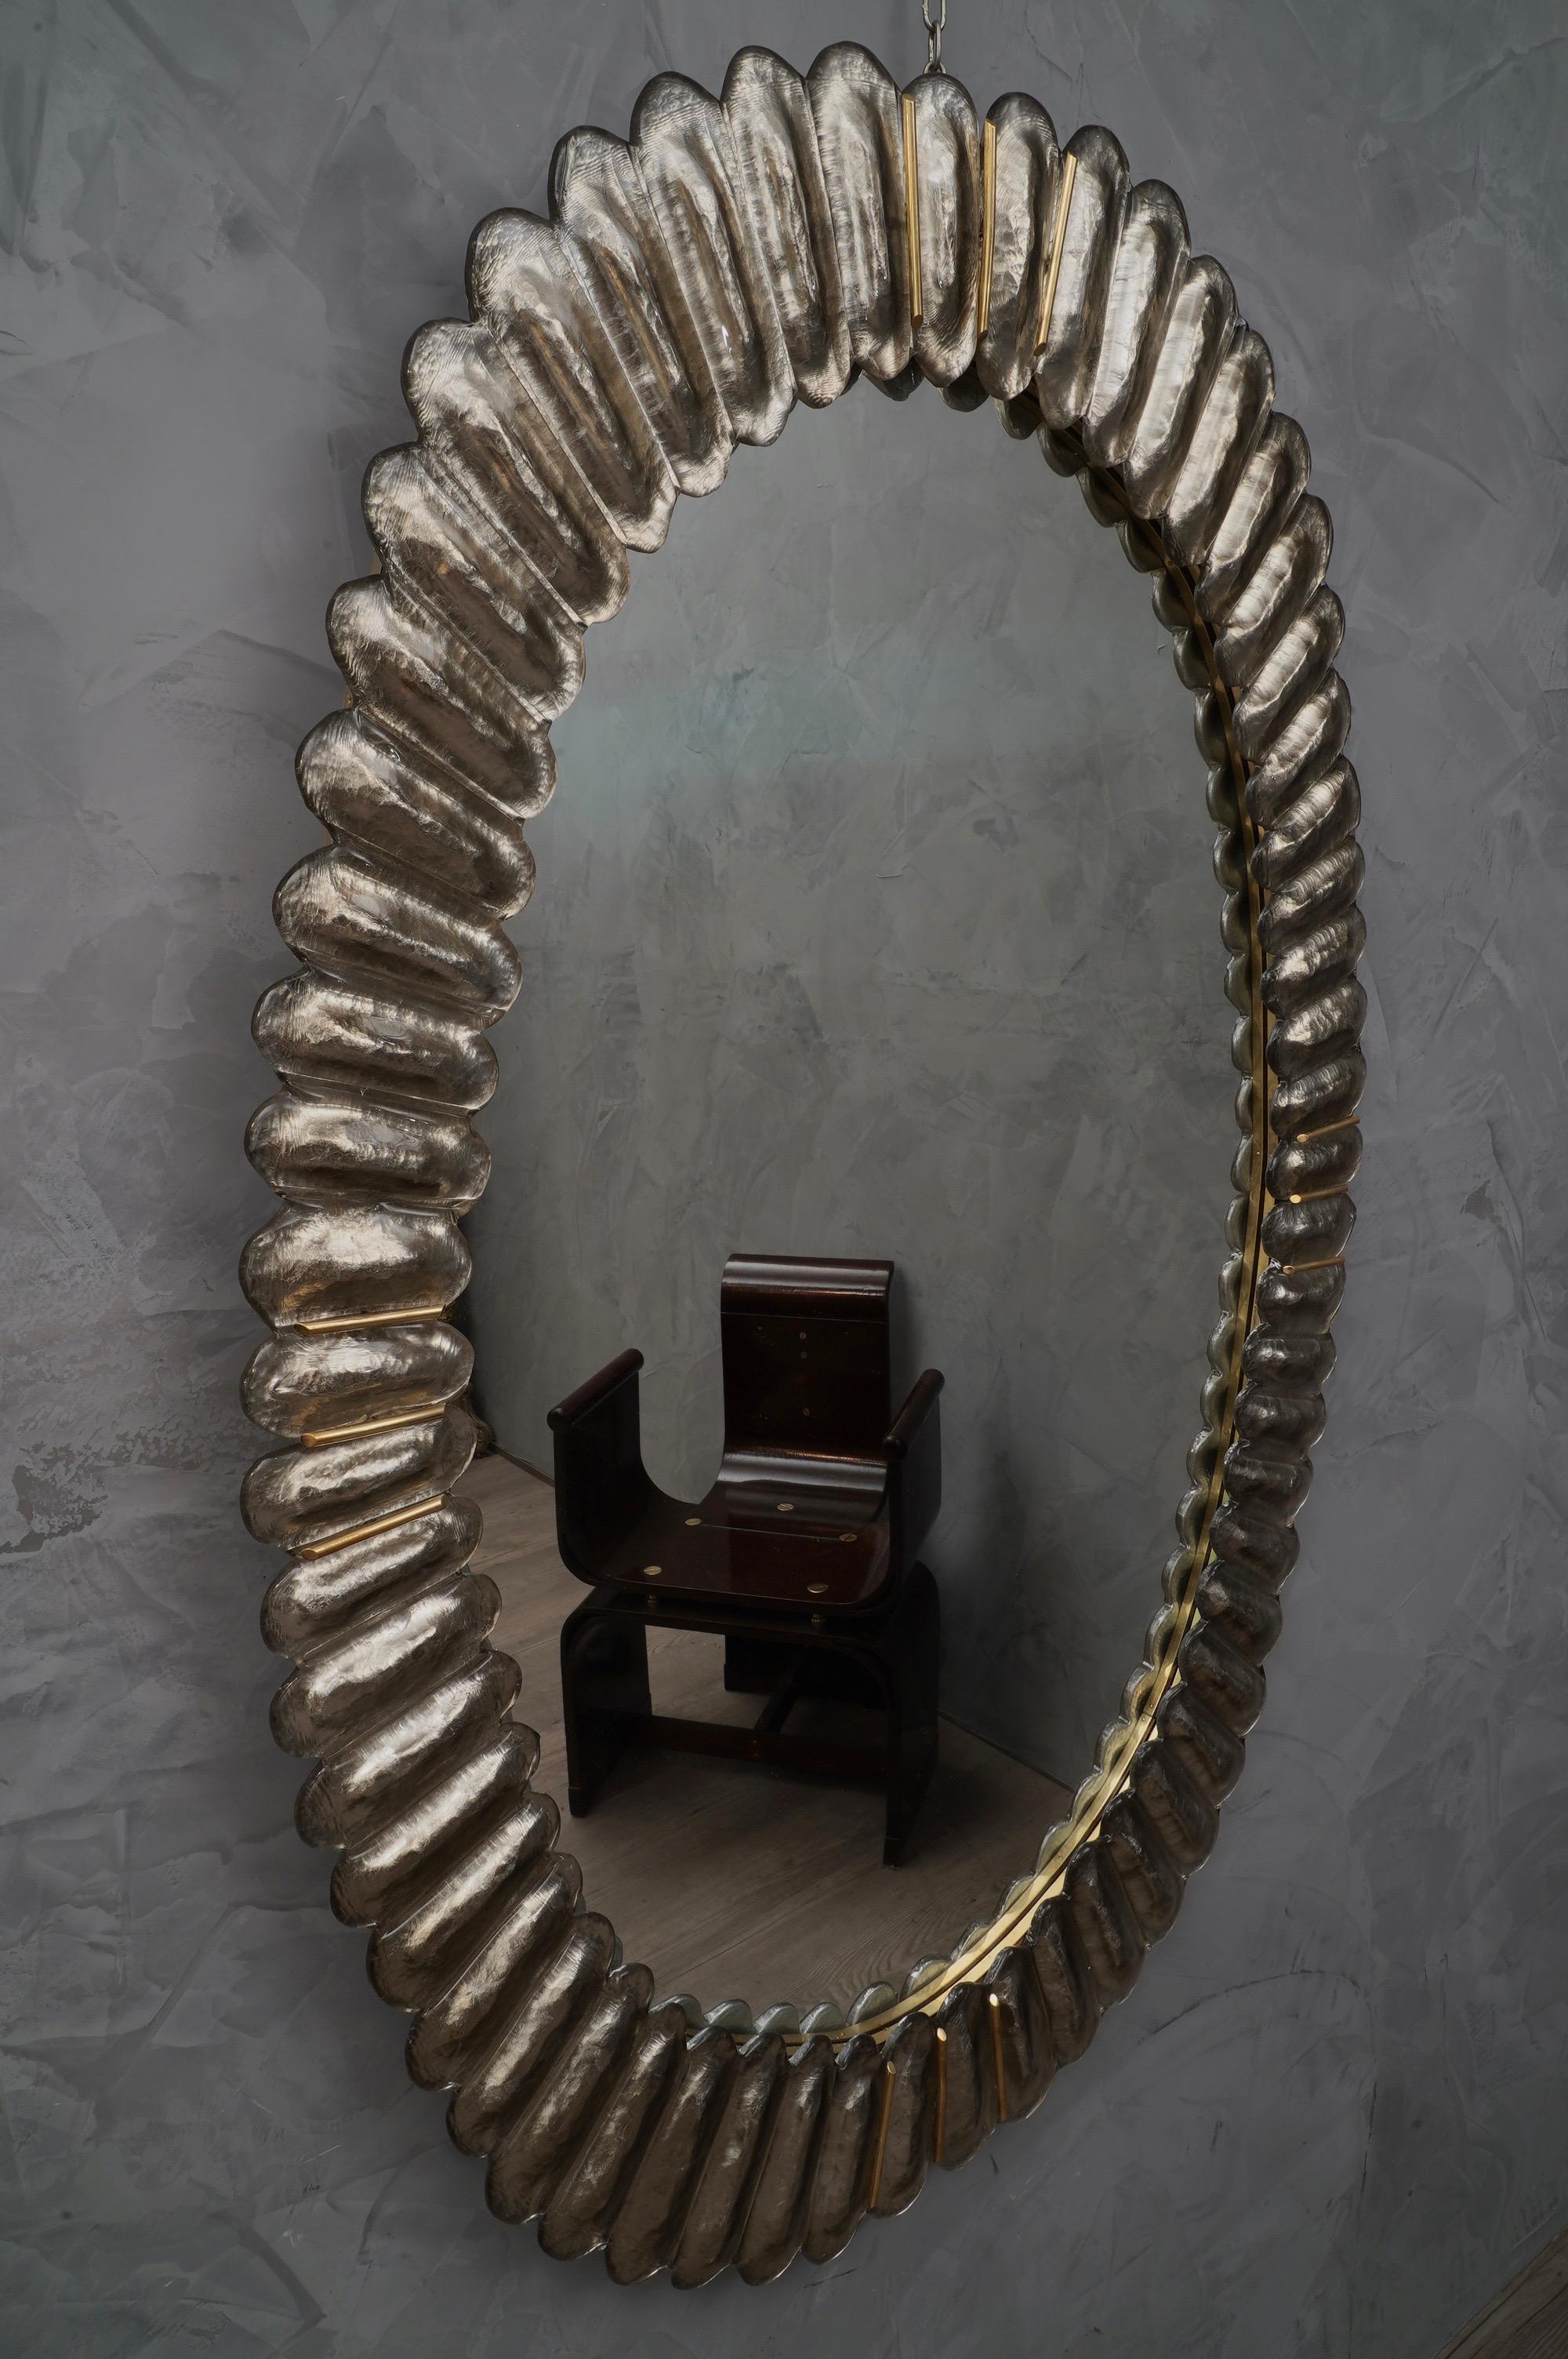 Stunning mirror in blazing silver color Murano glass, Venice. A mirror that alone will furnish your home environment.

The mirror is oval in shape and can be mounted both horizontally and vertically. Murano glass is silver in color mirrored behind.